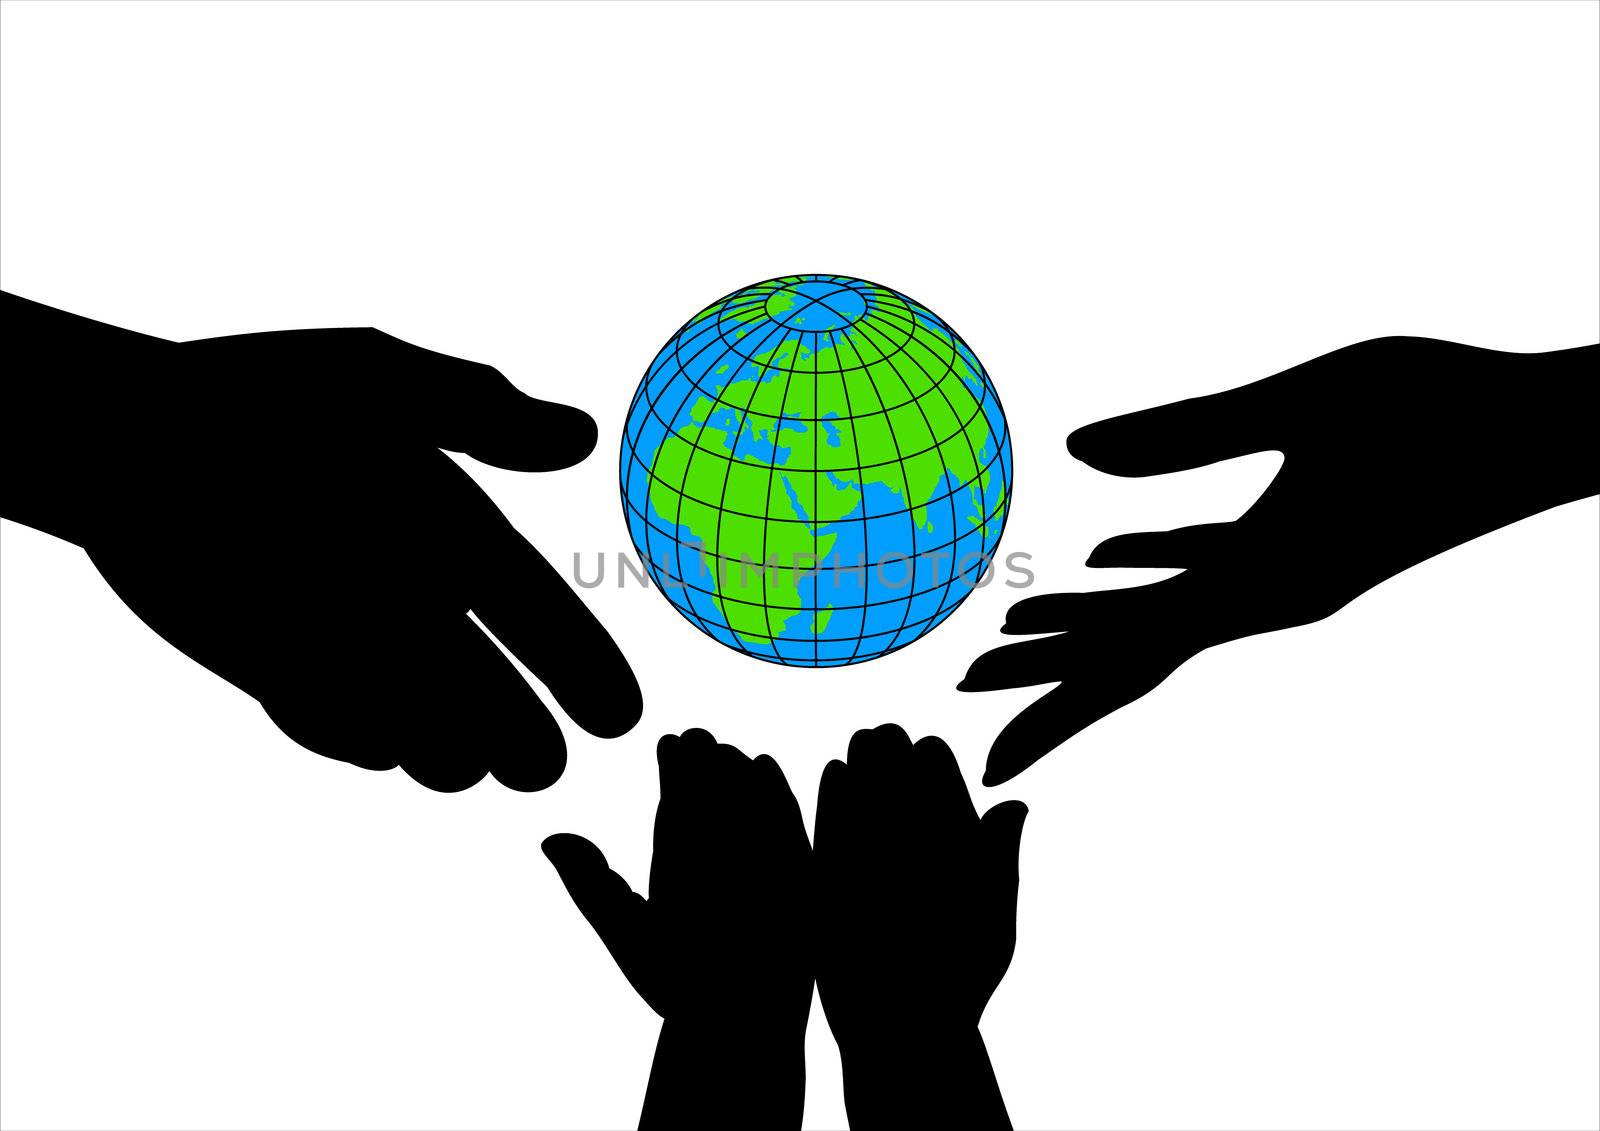 icon silhouettes of hands and the planet by rodakm